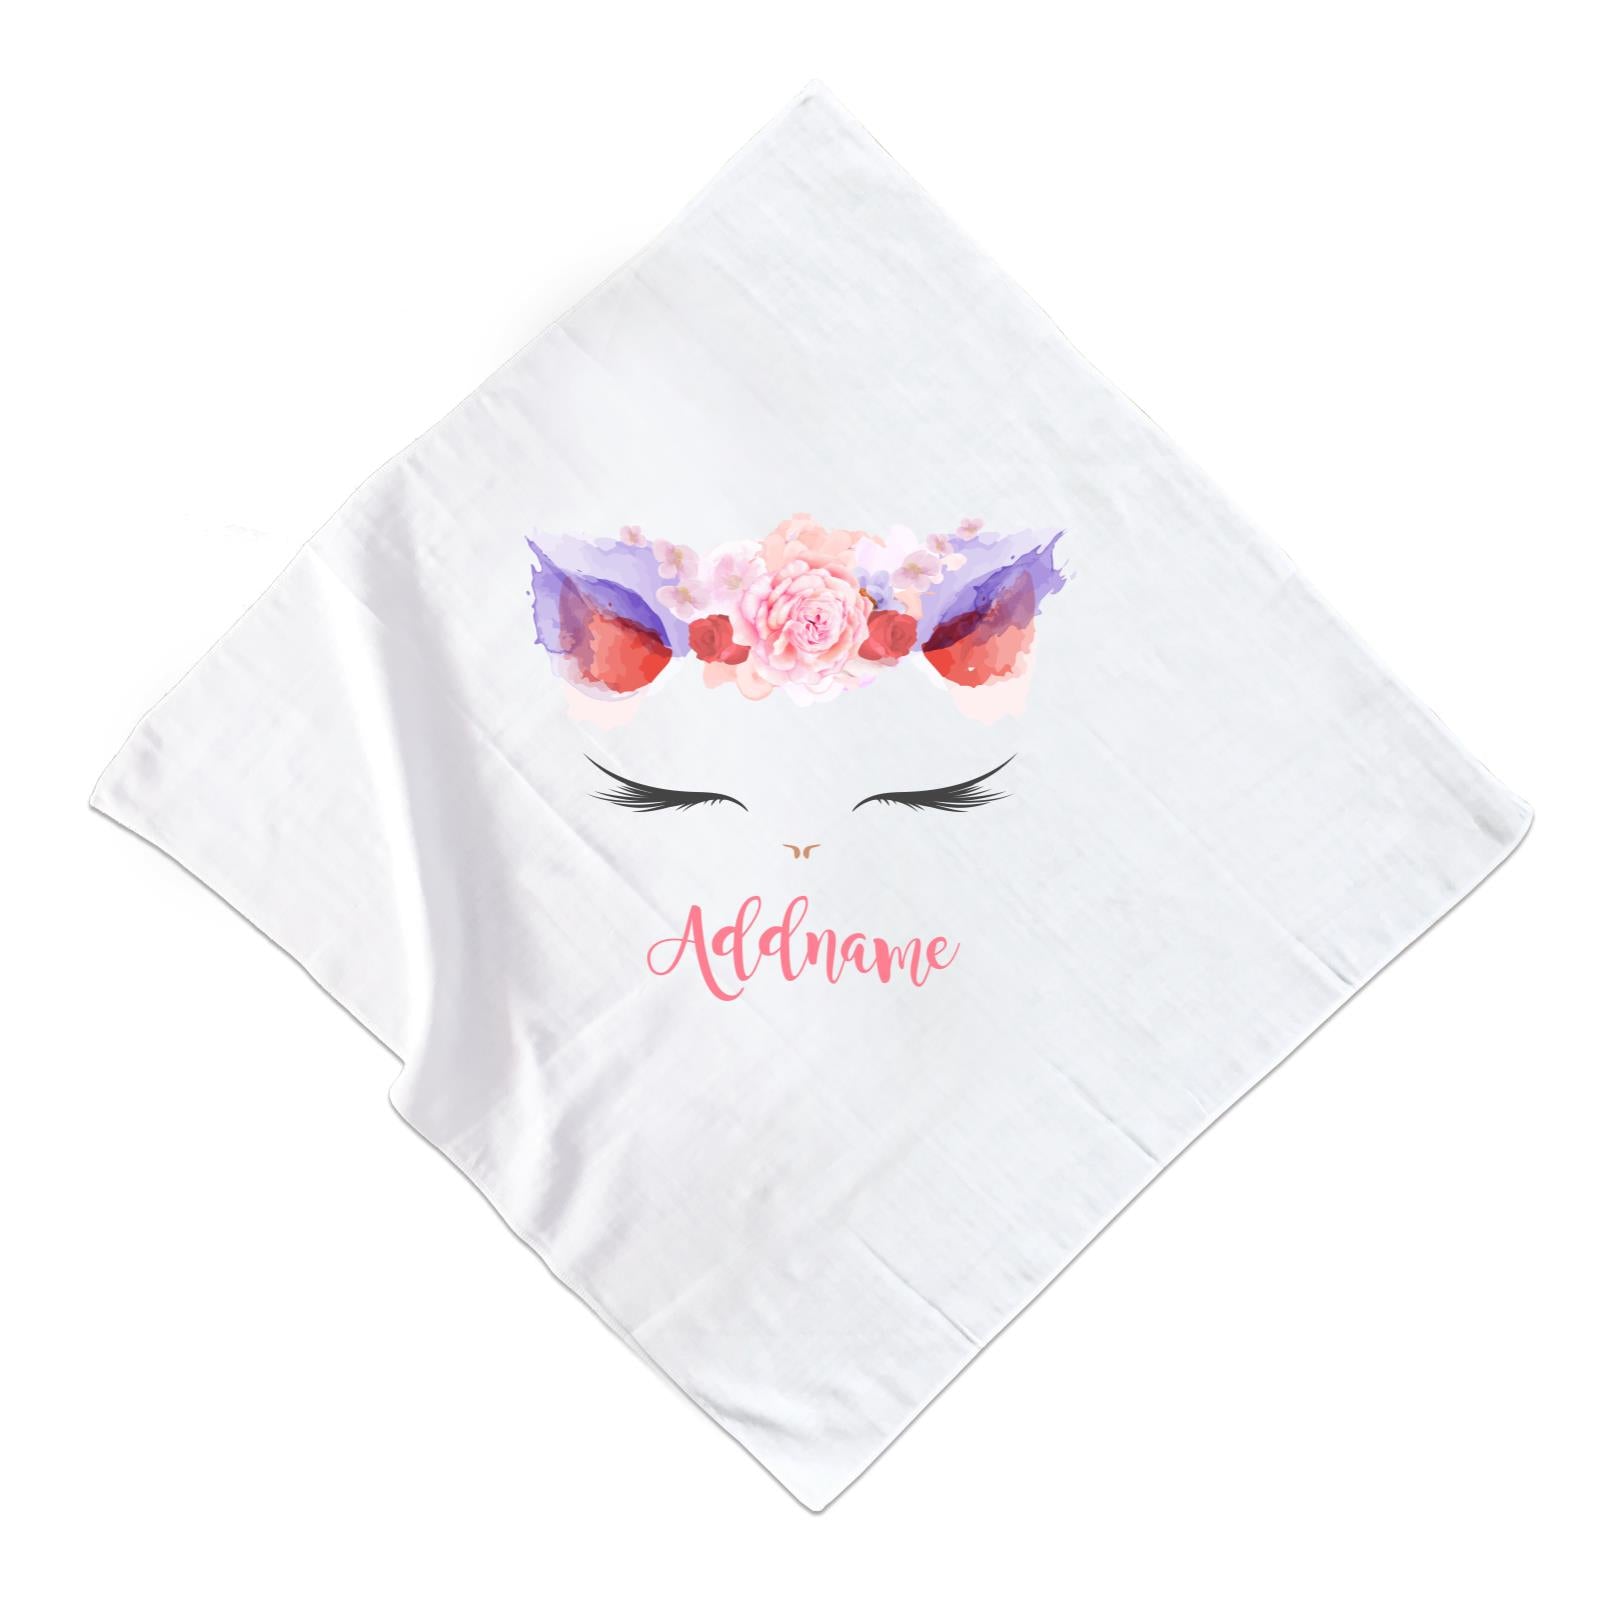 Pink and Red Roses Garland Cat Face Addname Muslin  Square